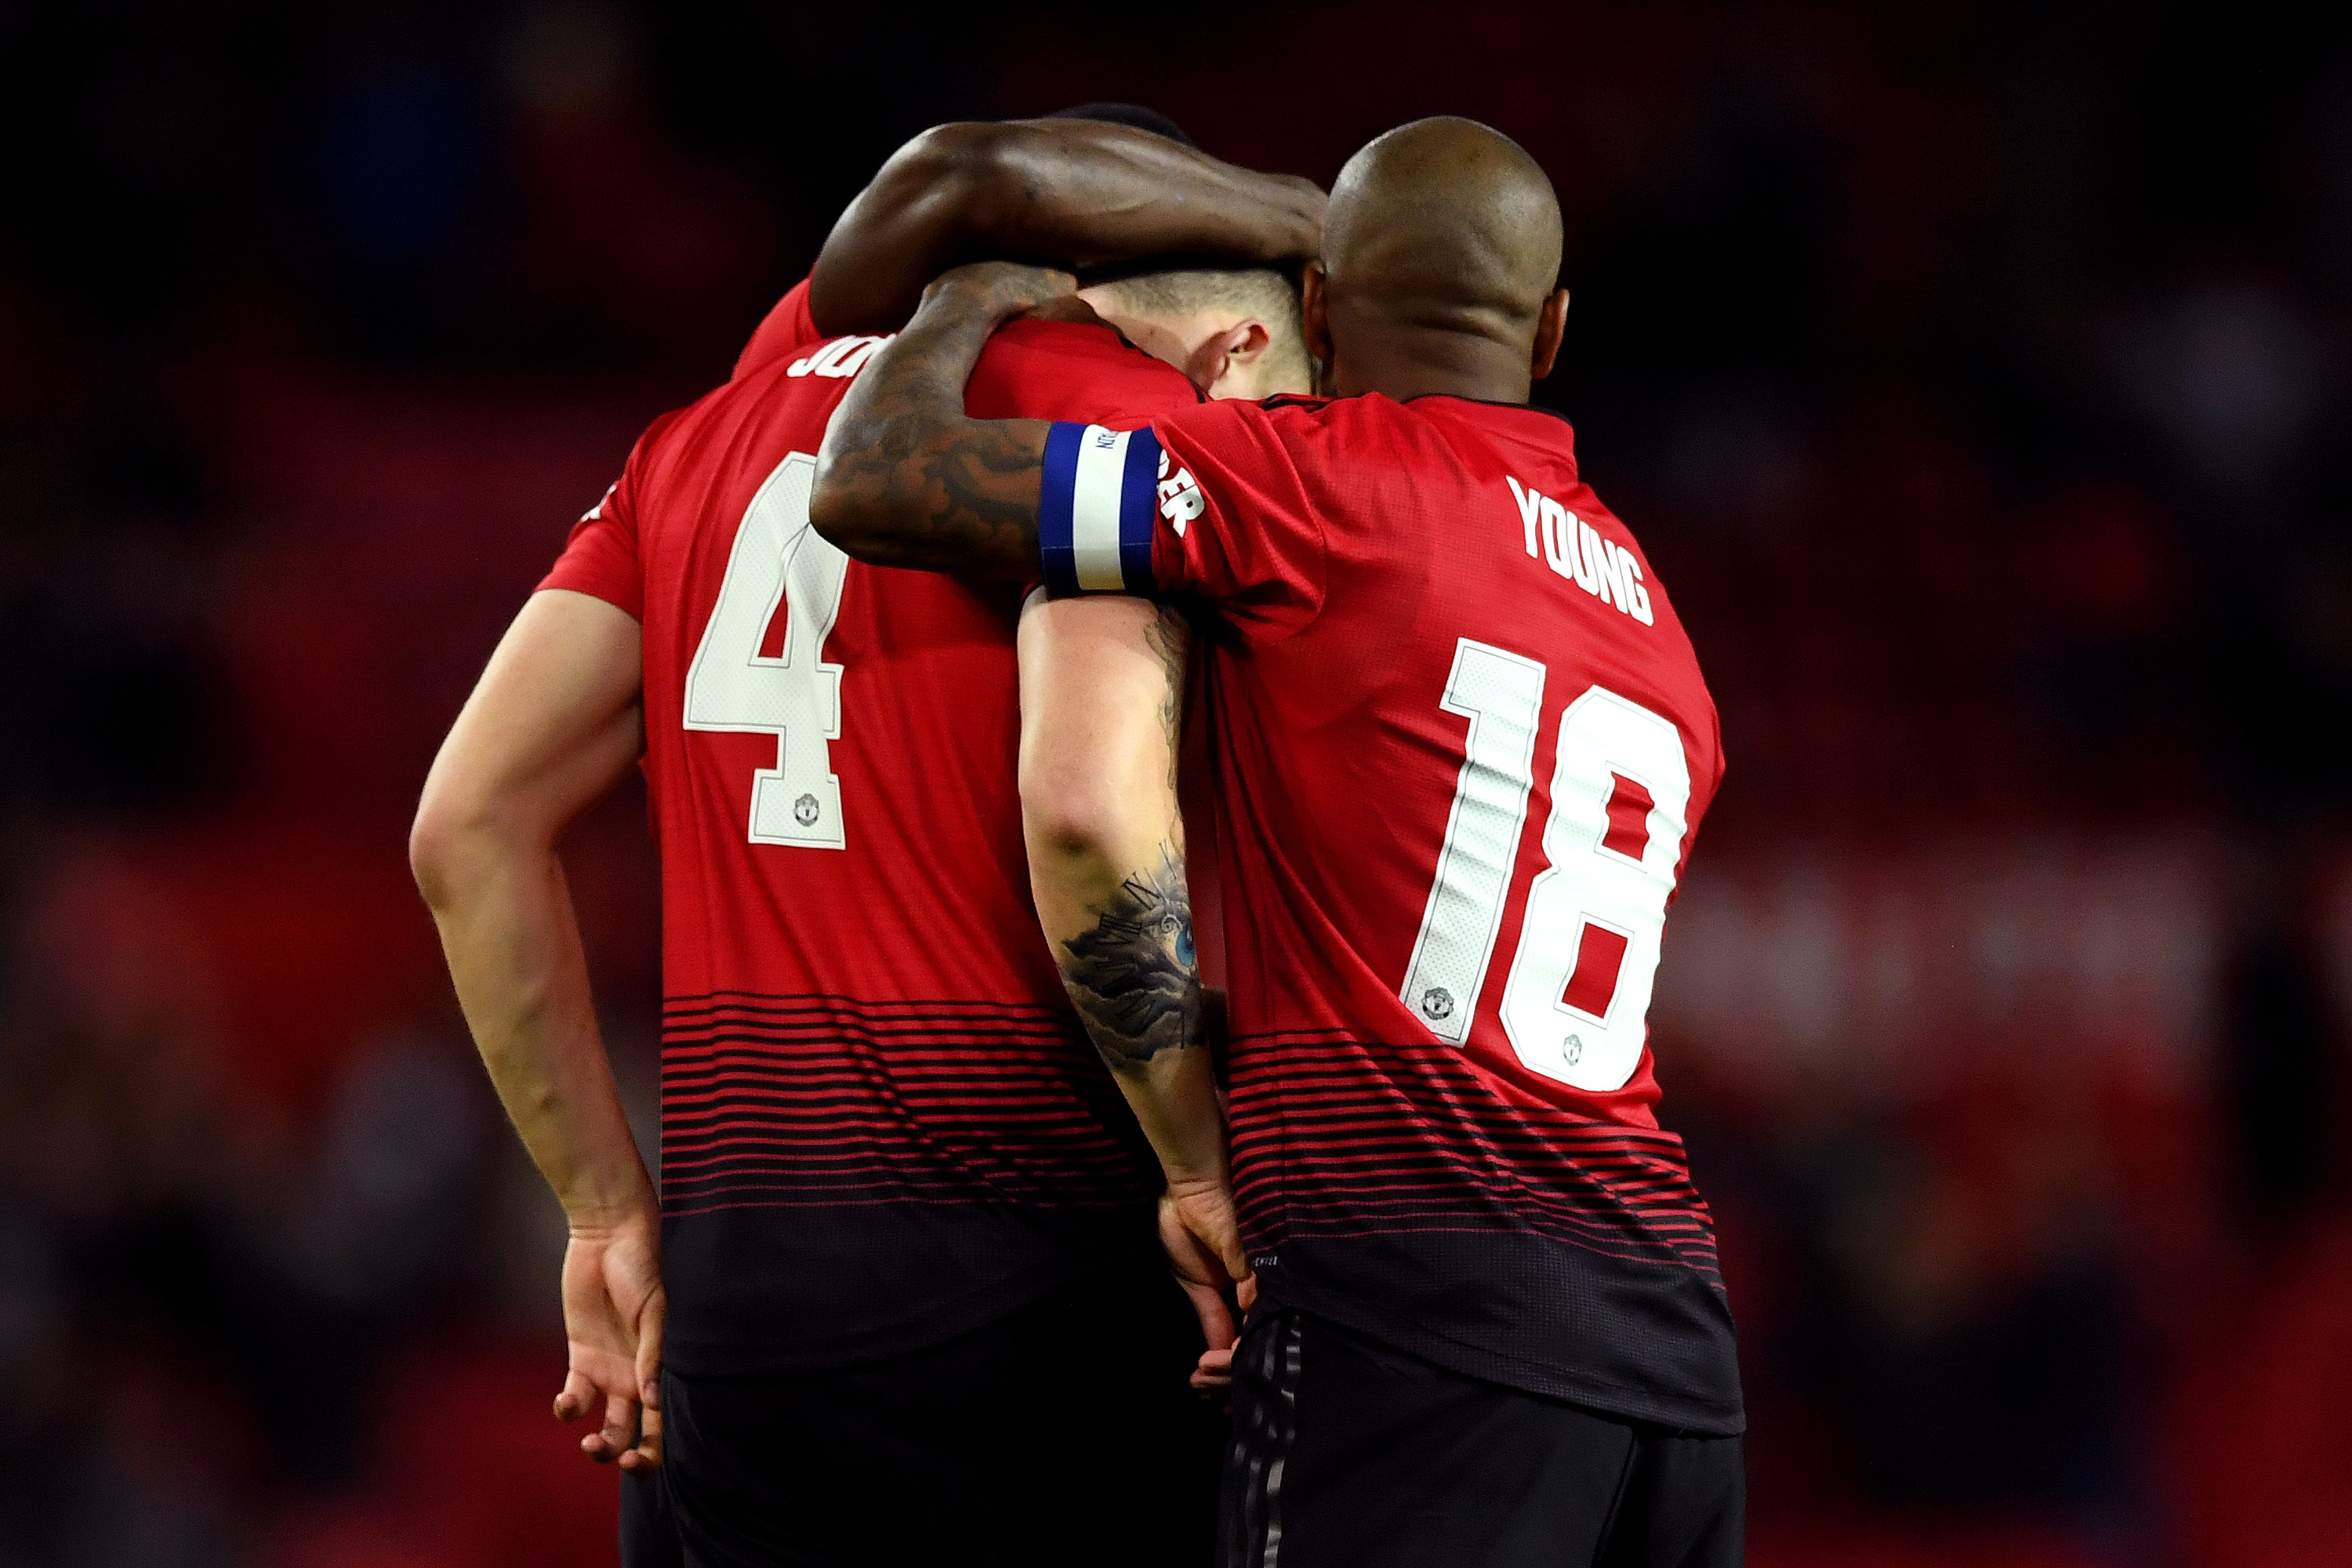 MANCHESTER, ENGLAND - SEPTEMBER 25:  Ashley Young of Manchester United consoles teammate Phil Jones of Manchester United after he misses his teams eight penalty, resulting in Derby County winning the penalty shoot out, and therefore the Carabao Cup Third Round match between Manchester United and Derby County at Old Trafford on September 25, 2018 in Manchester, England.  (Photo by Gareth Copley/Getty Images)